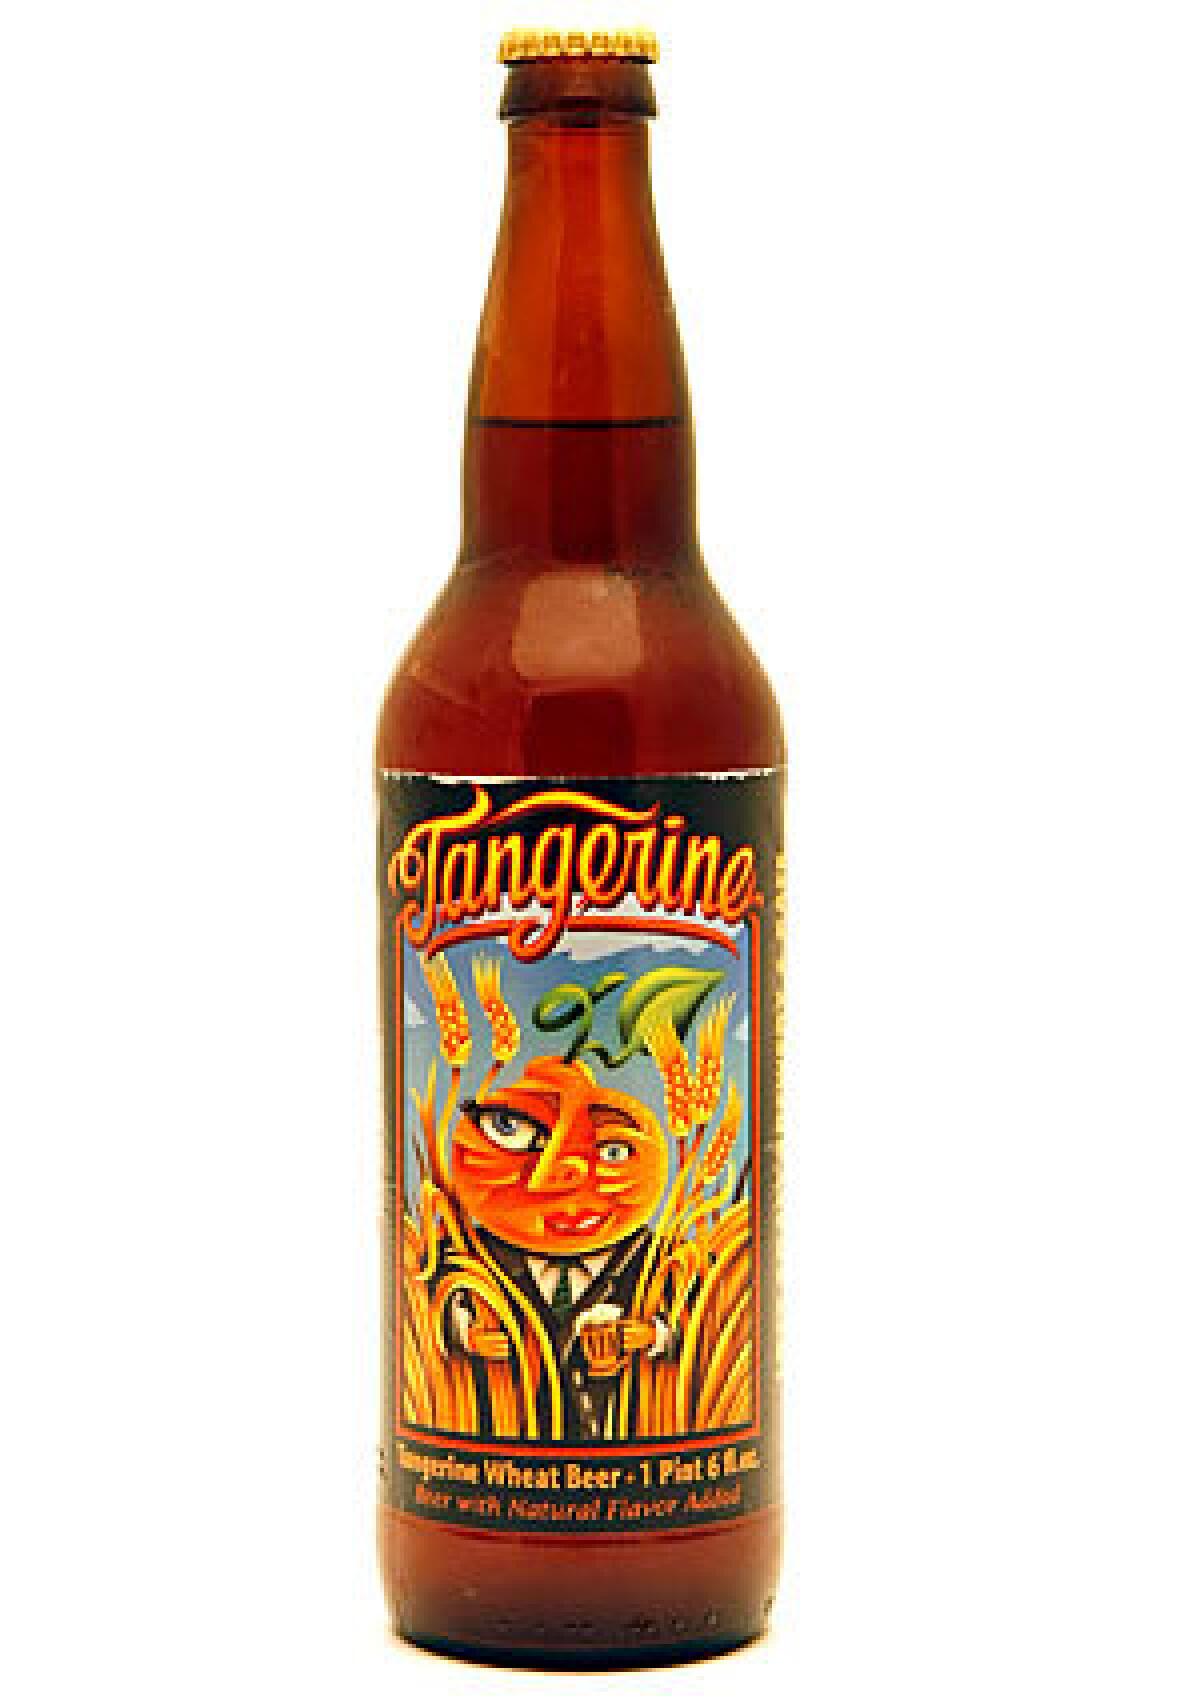 BEER OF THE MONTH: Lost Coast Brewing Tangerine Wheat.